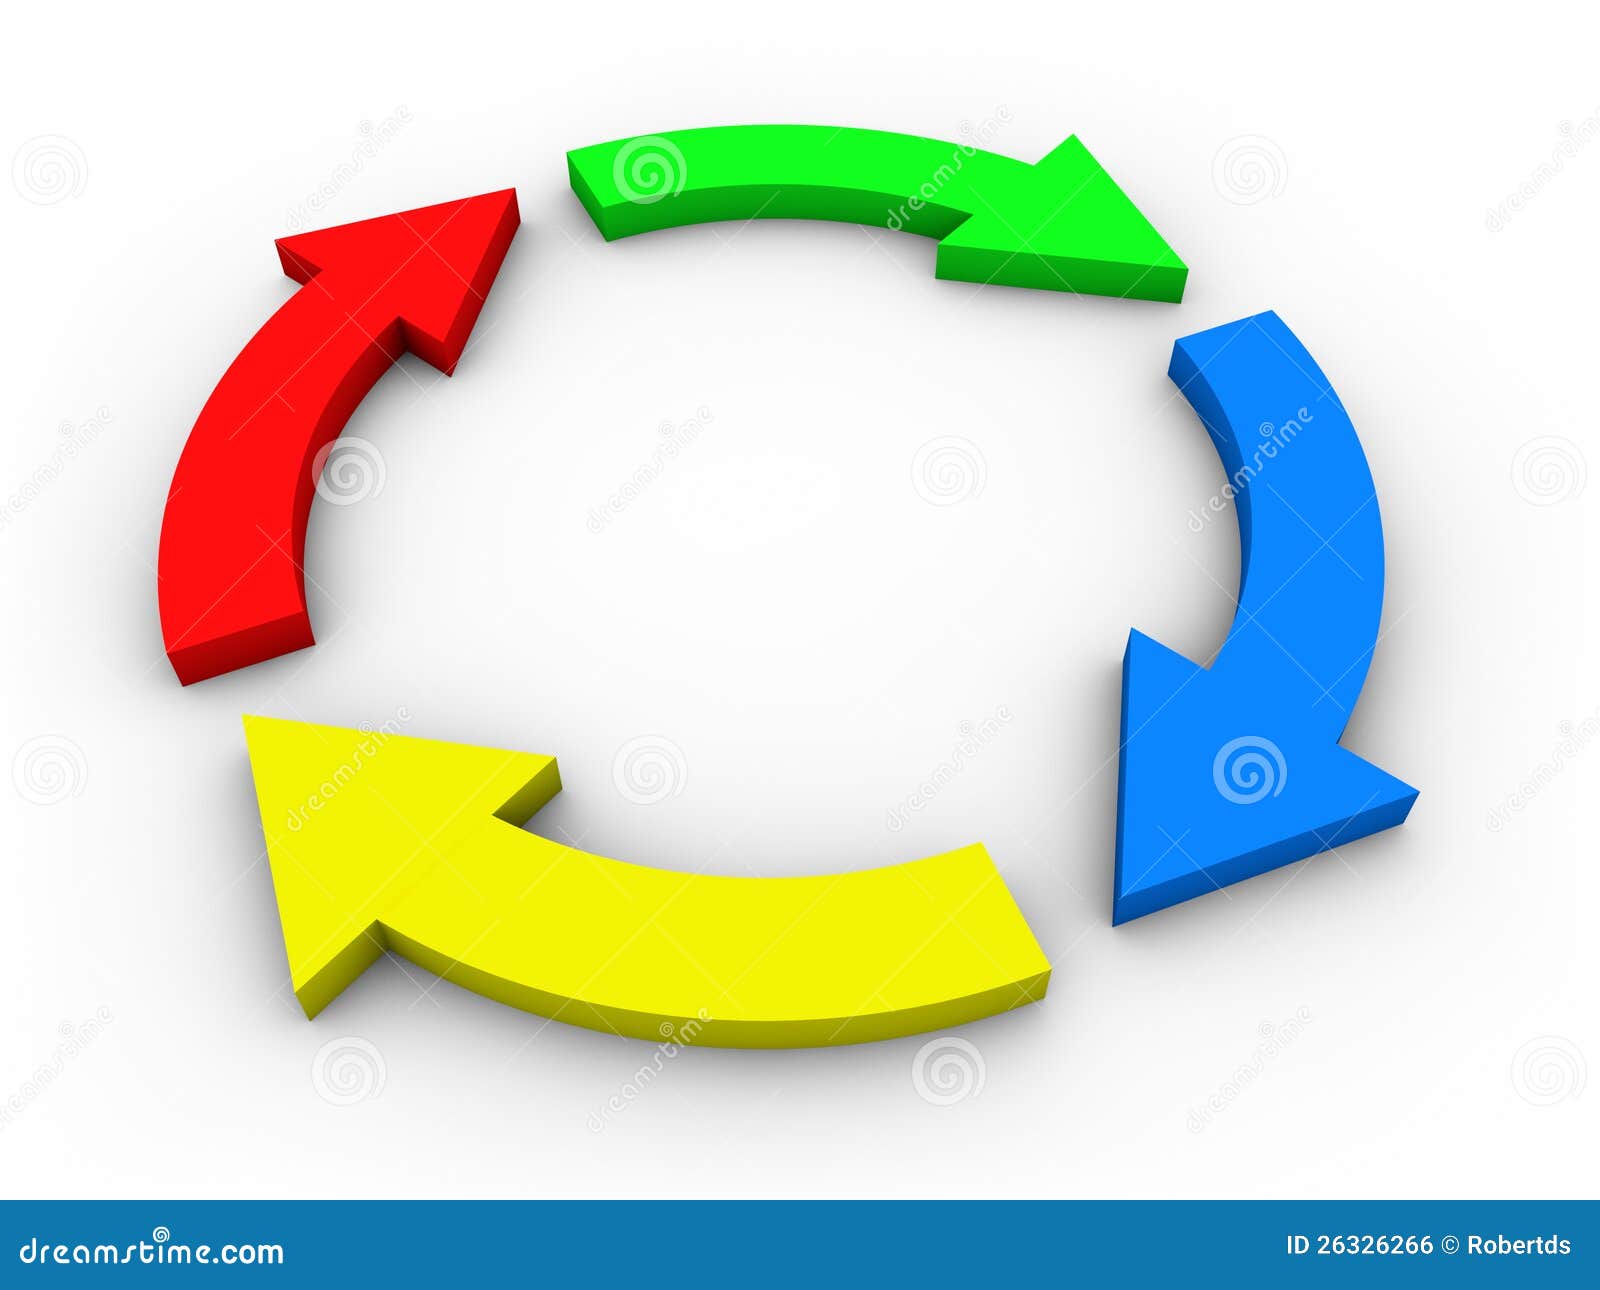 Circular Flow Diagram With Arrows Colorful Stock Illustration Illustration Of Coloured Process 26326266